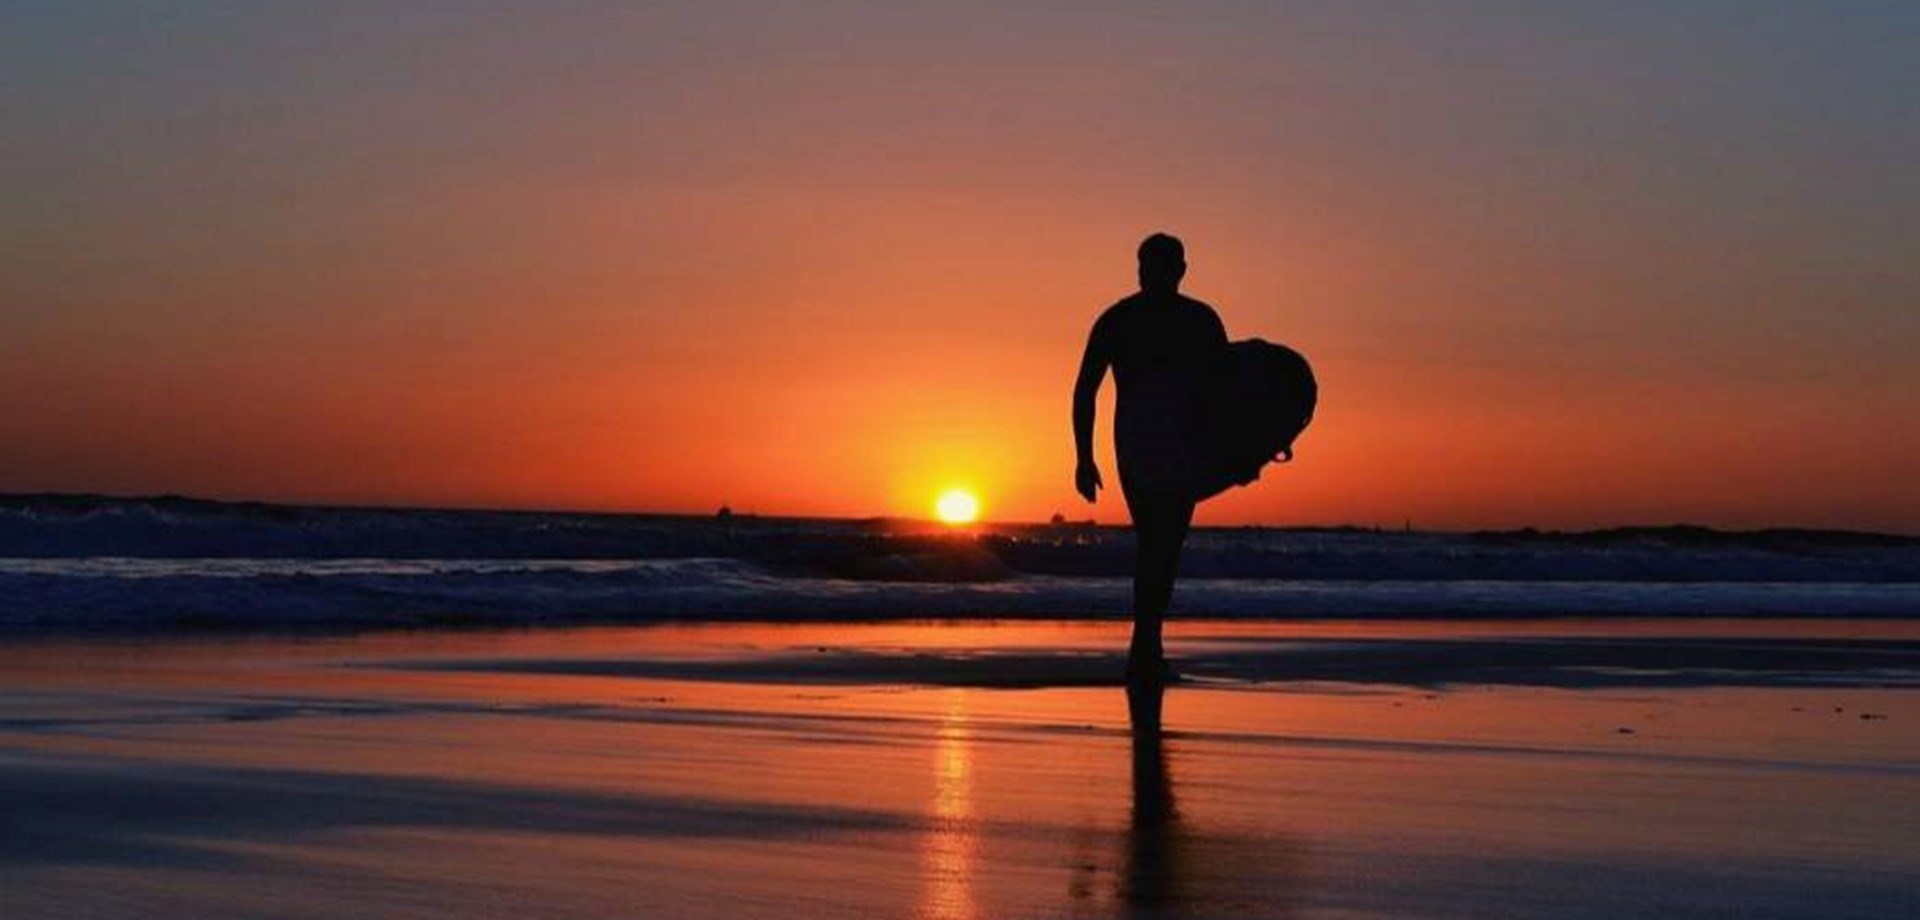 Find out why the Algarve is a paradise for surfing and find the best beaches to practice it.